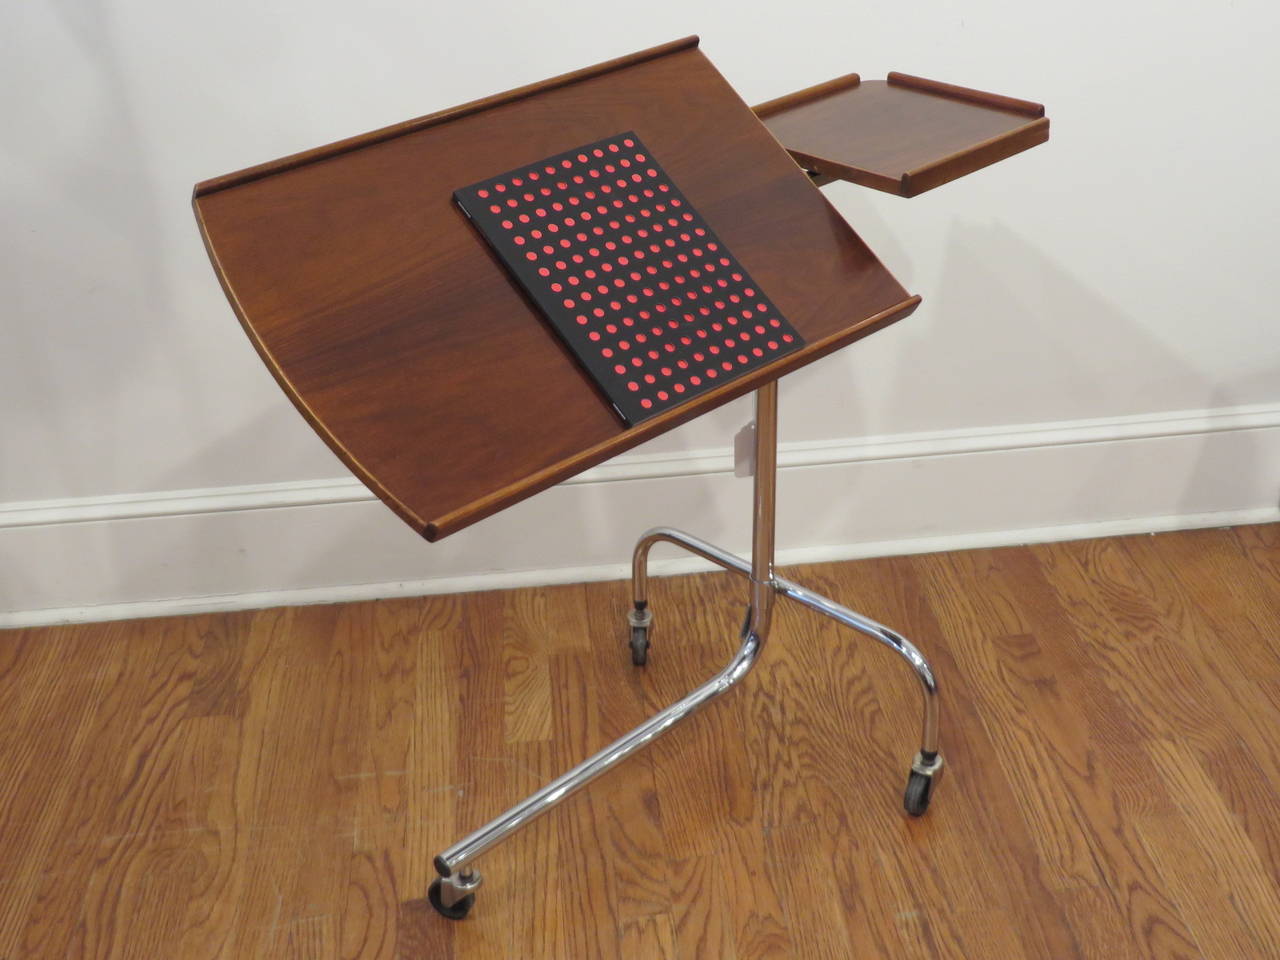 Two way adjustable, wood and chrome Danish reading or writing table on wheels. Larger work area tilts to required angle for reading or writing, while the smaller surface is level and can be used for food or drinks. Overall height can be raised to